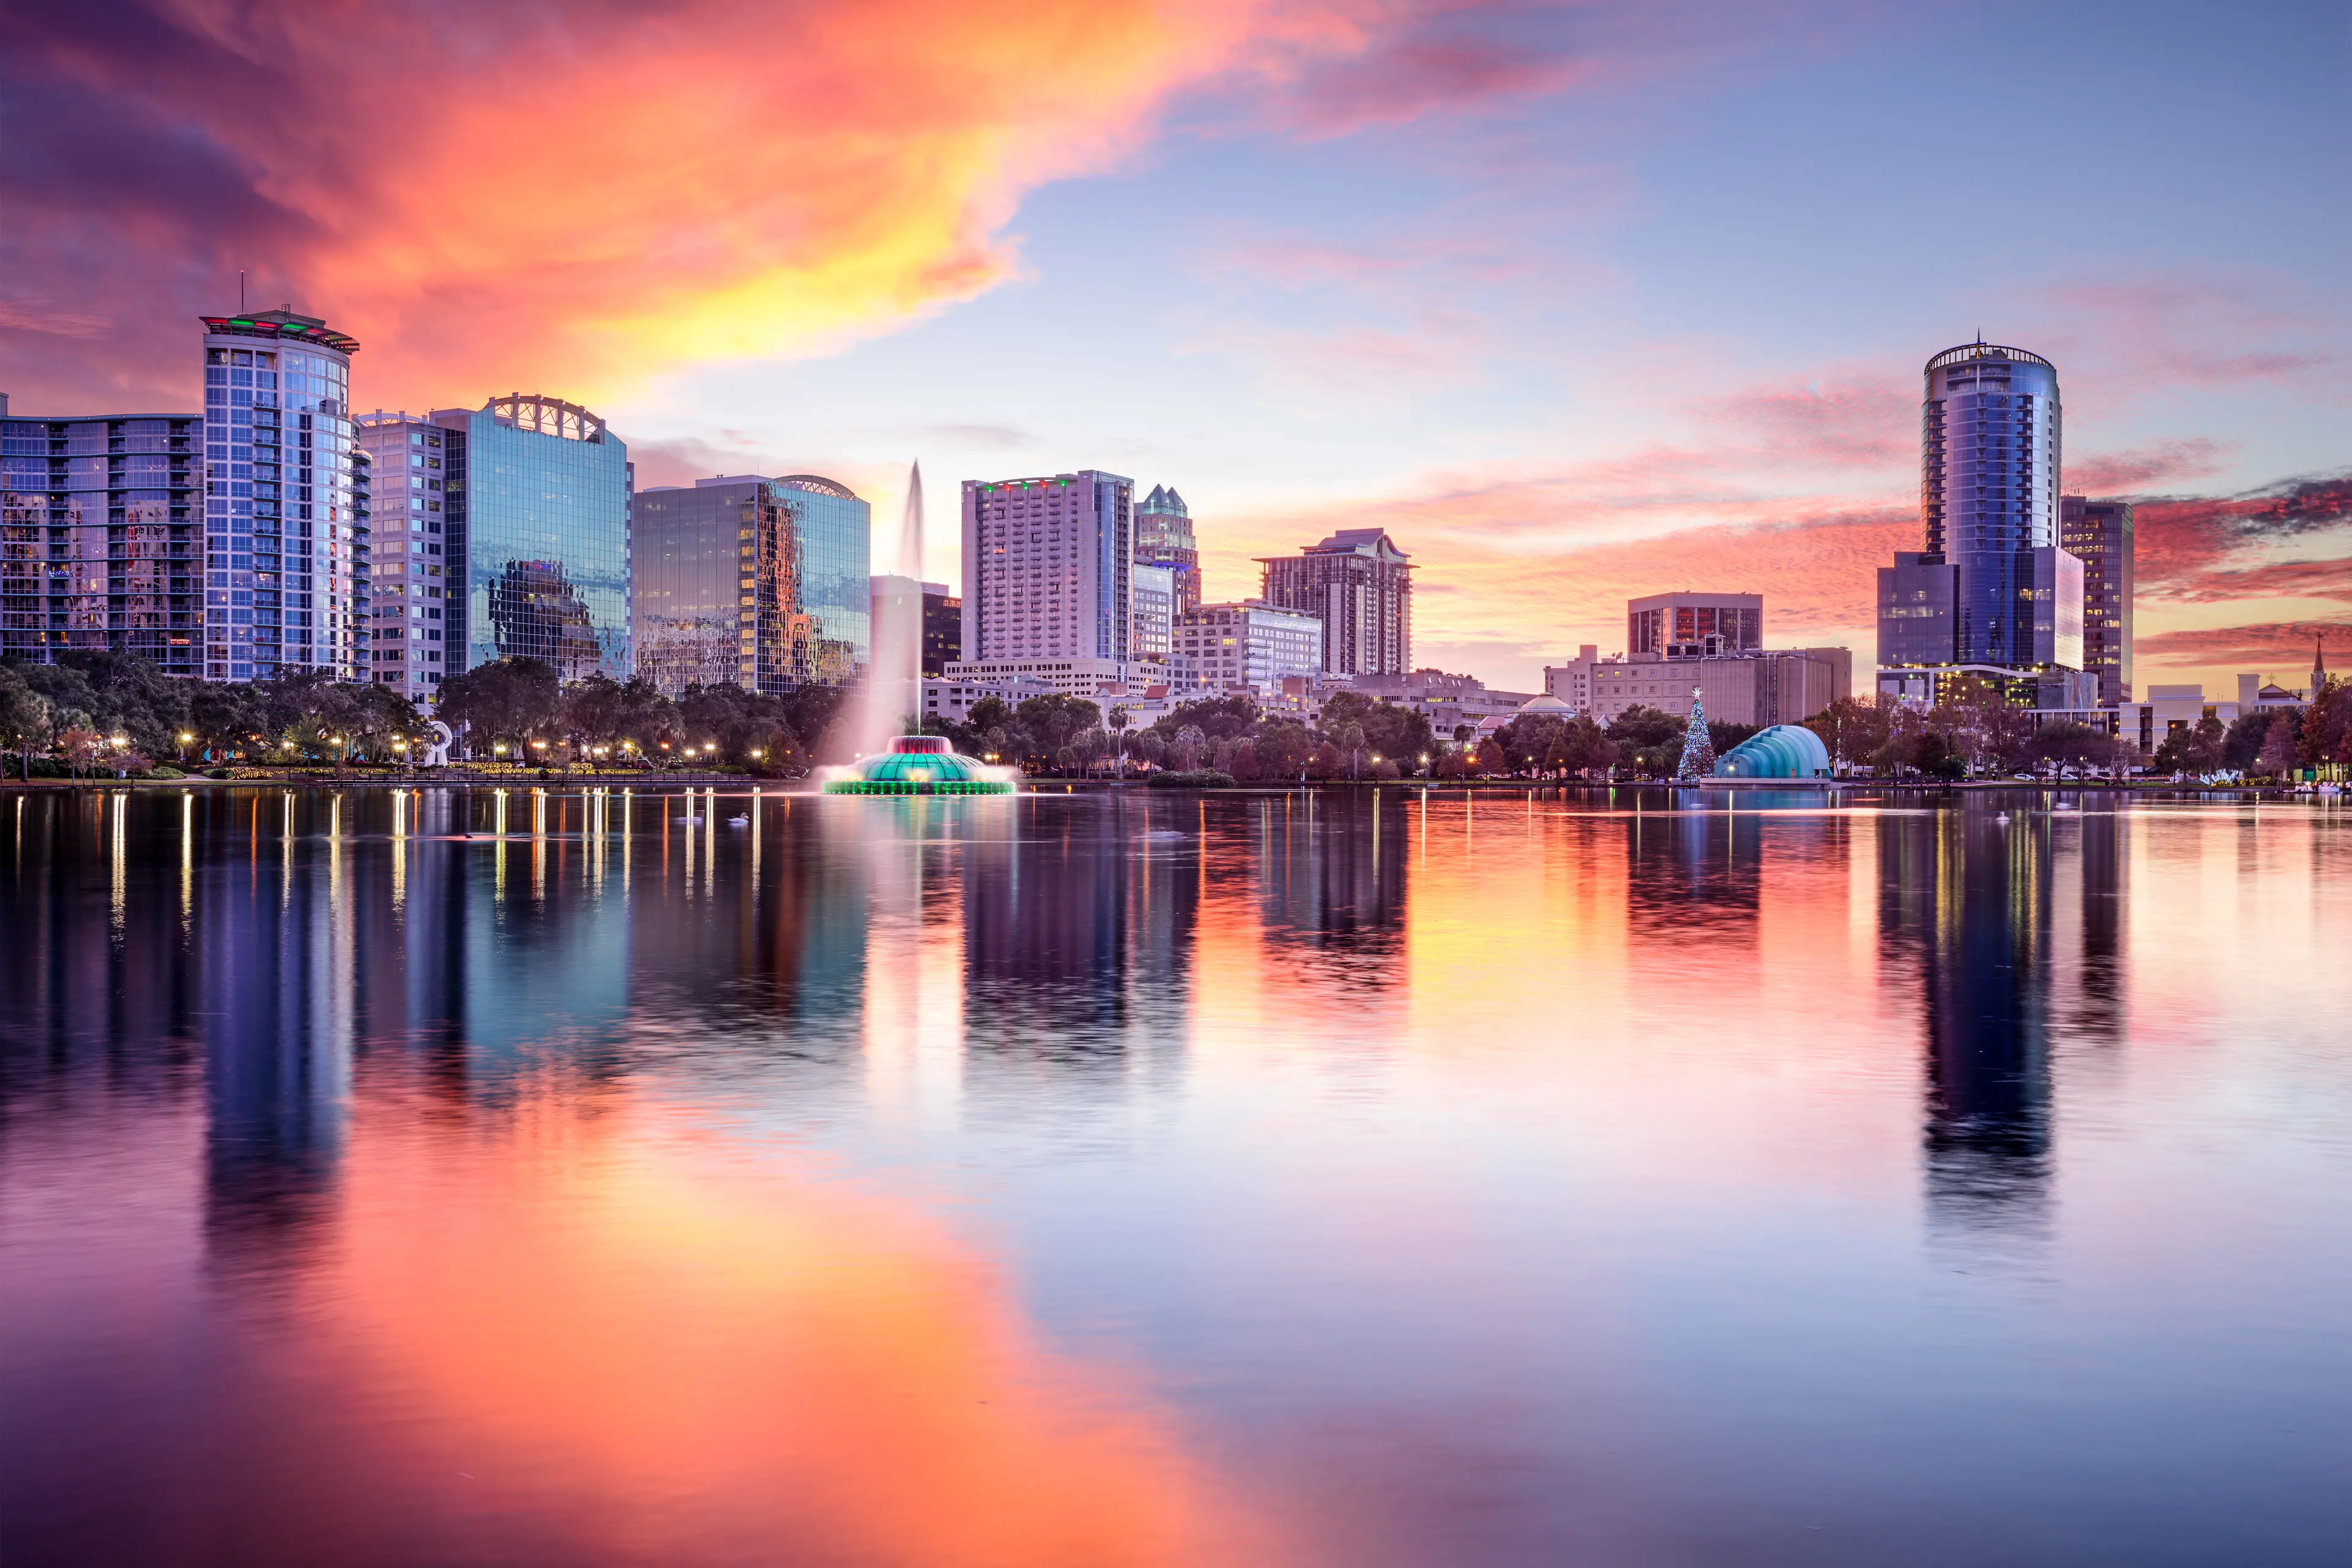 4-Day Family Relaxation and Sightseeing Adventure in Orlando, Florida